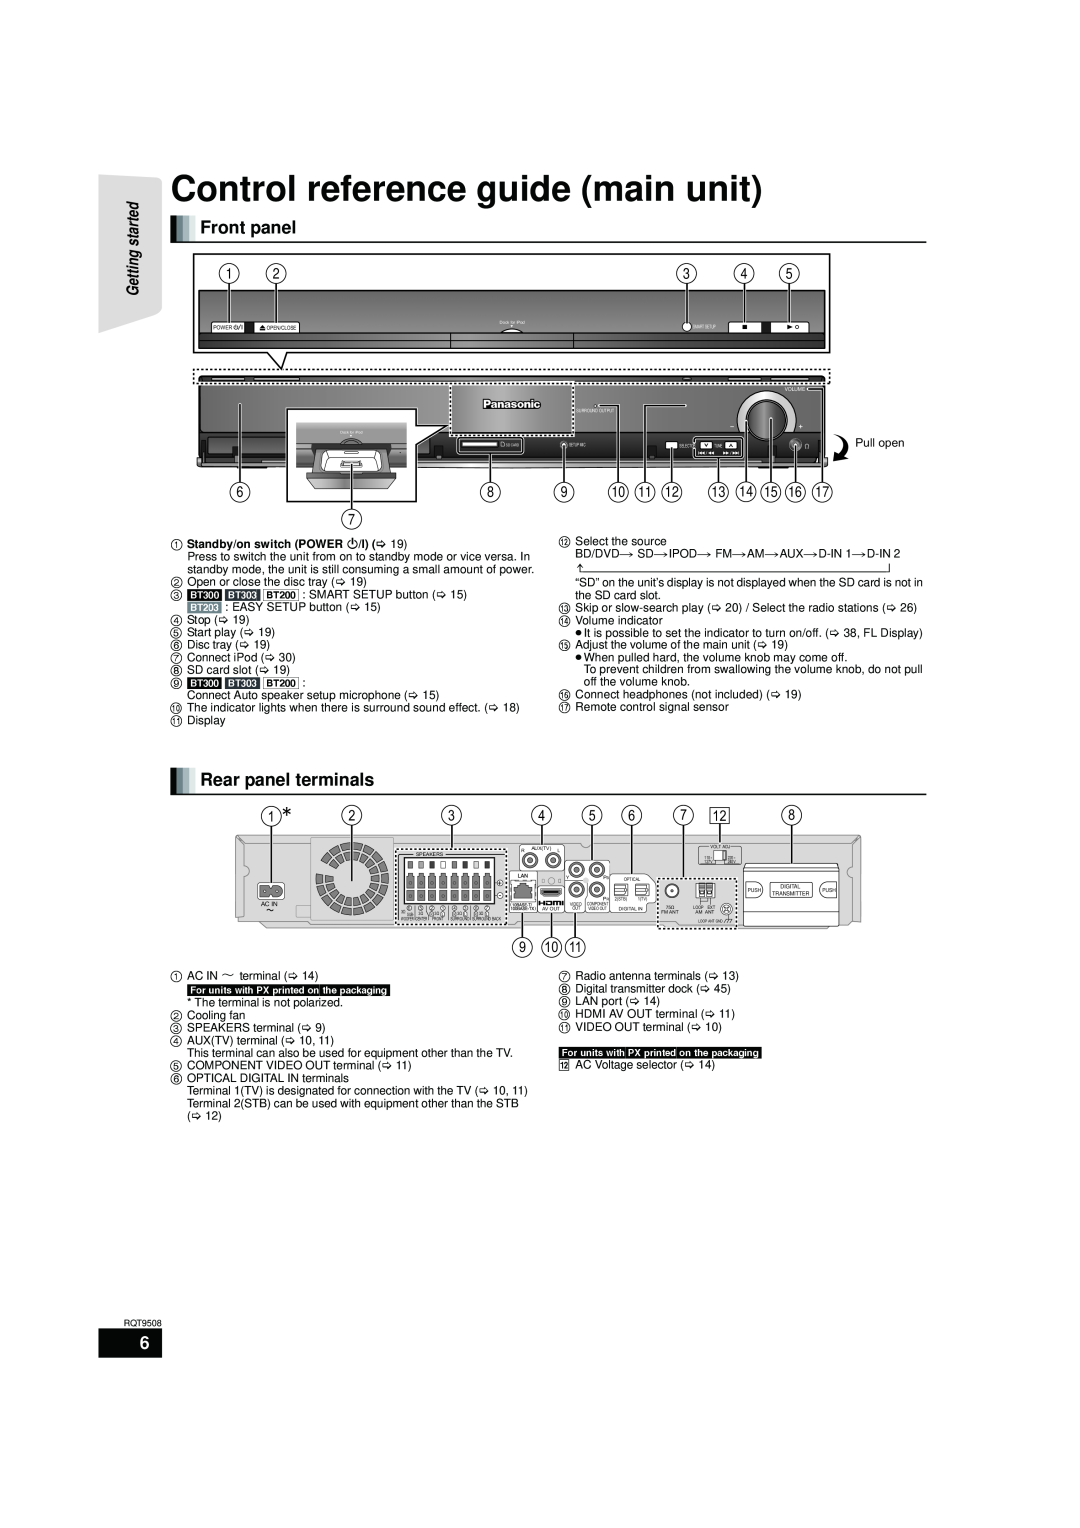 Panasonic SC-BT200 Control reference guide main unit, Front panel, Rear panel terminals, 9 10, Getting started, Pull open 